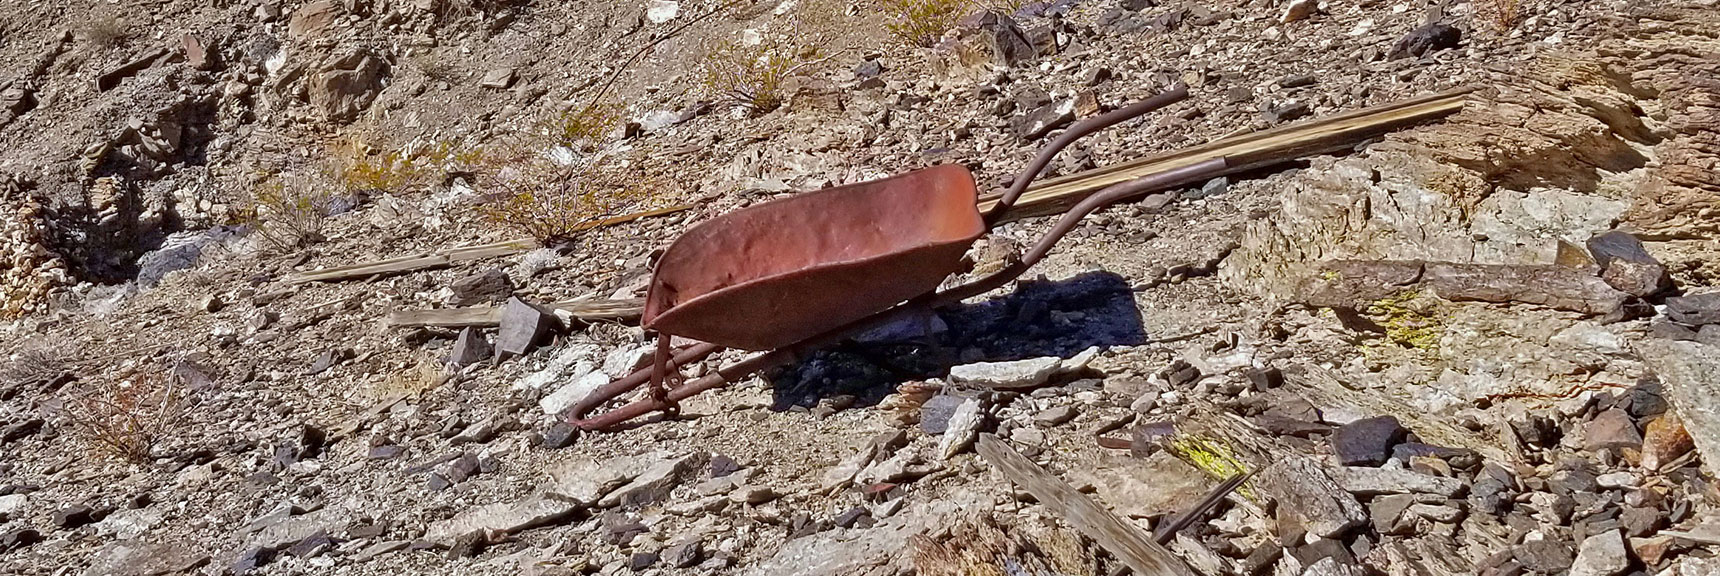 Wheel Barrow Used by Miners to Cart Raw Gold Ore from Mine Openings | Keane Wonder Mine | Death Valley National Park, California